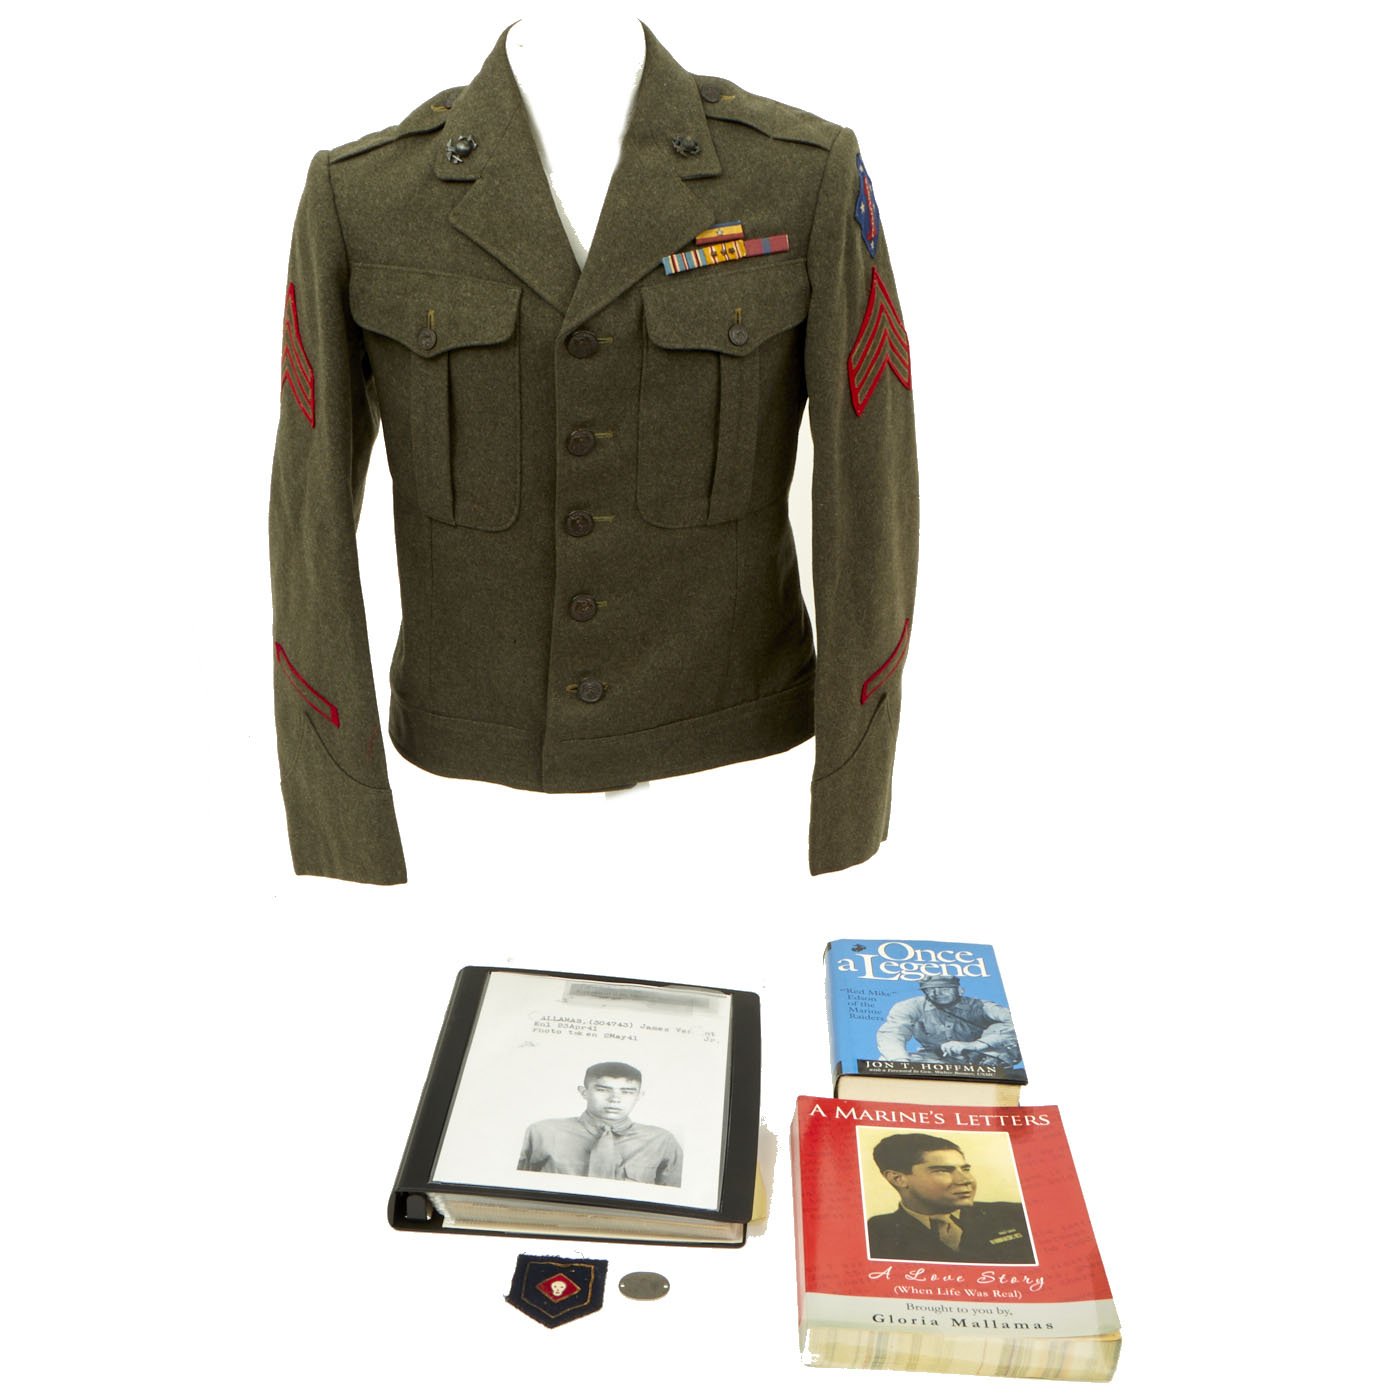 The gear of Marine Raiders from WWII